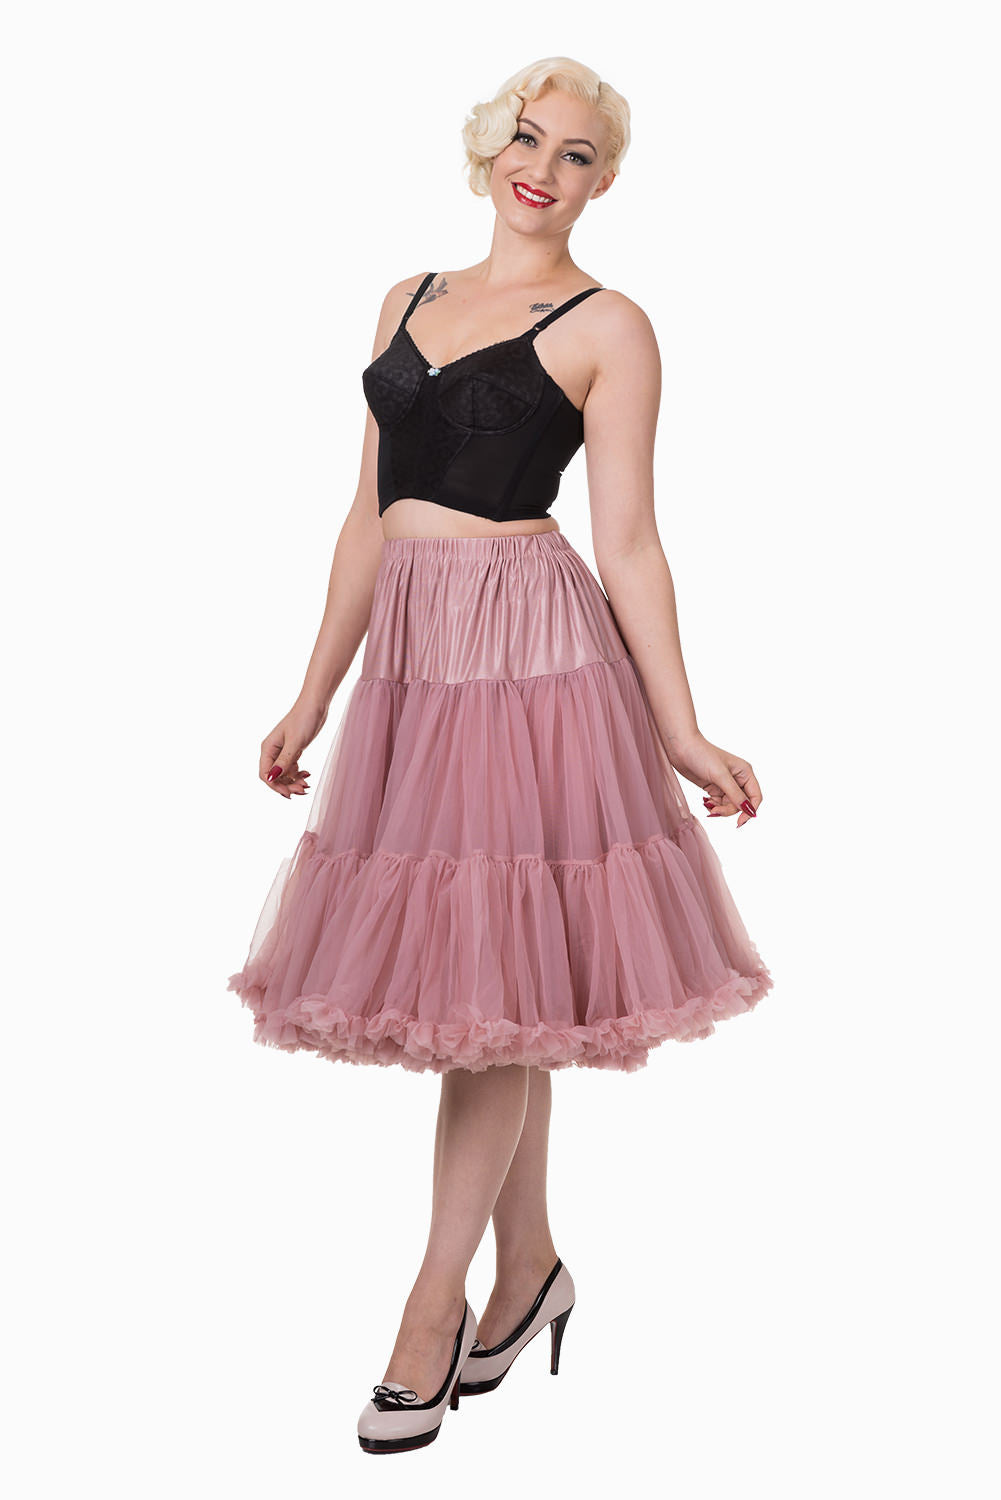 How to Choose the Best Petticoat for Your Outfit